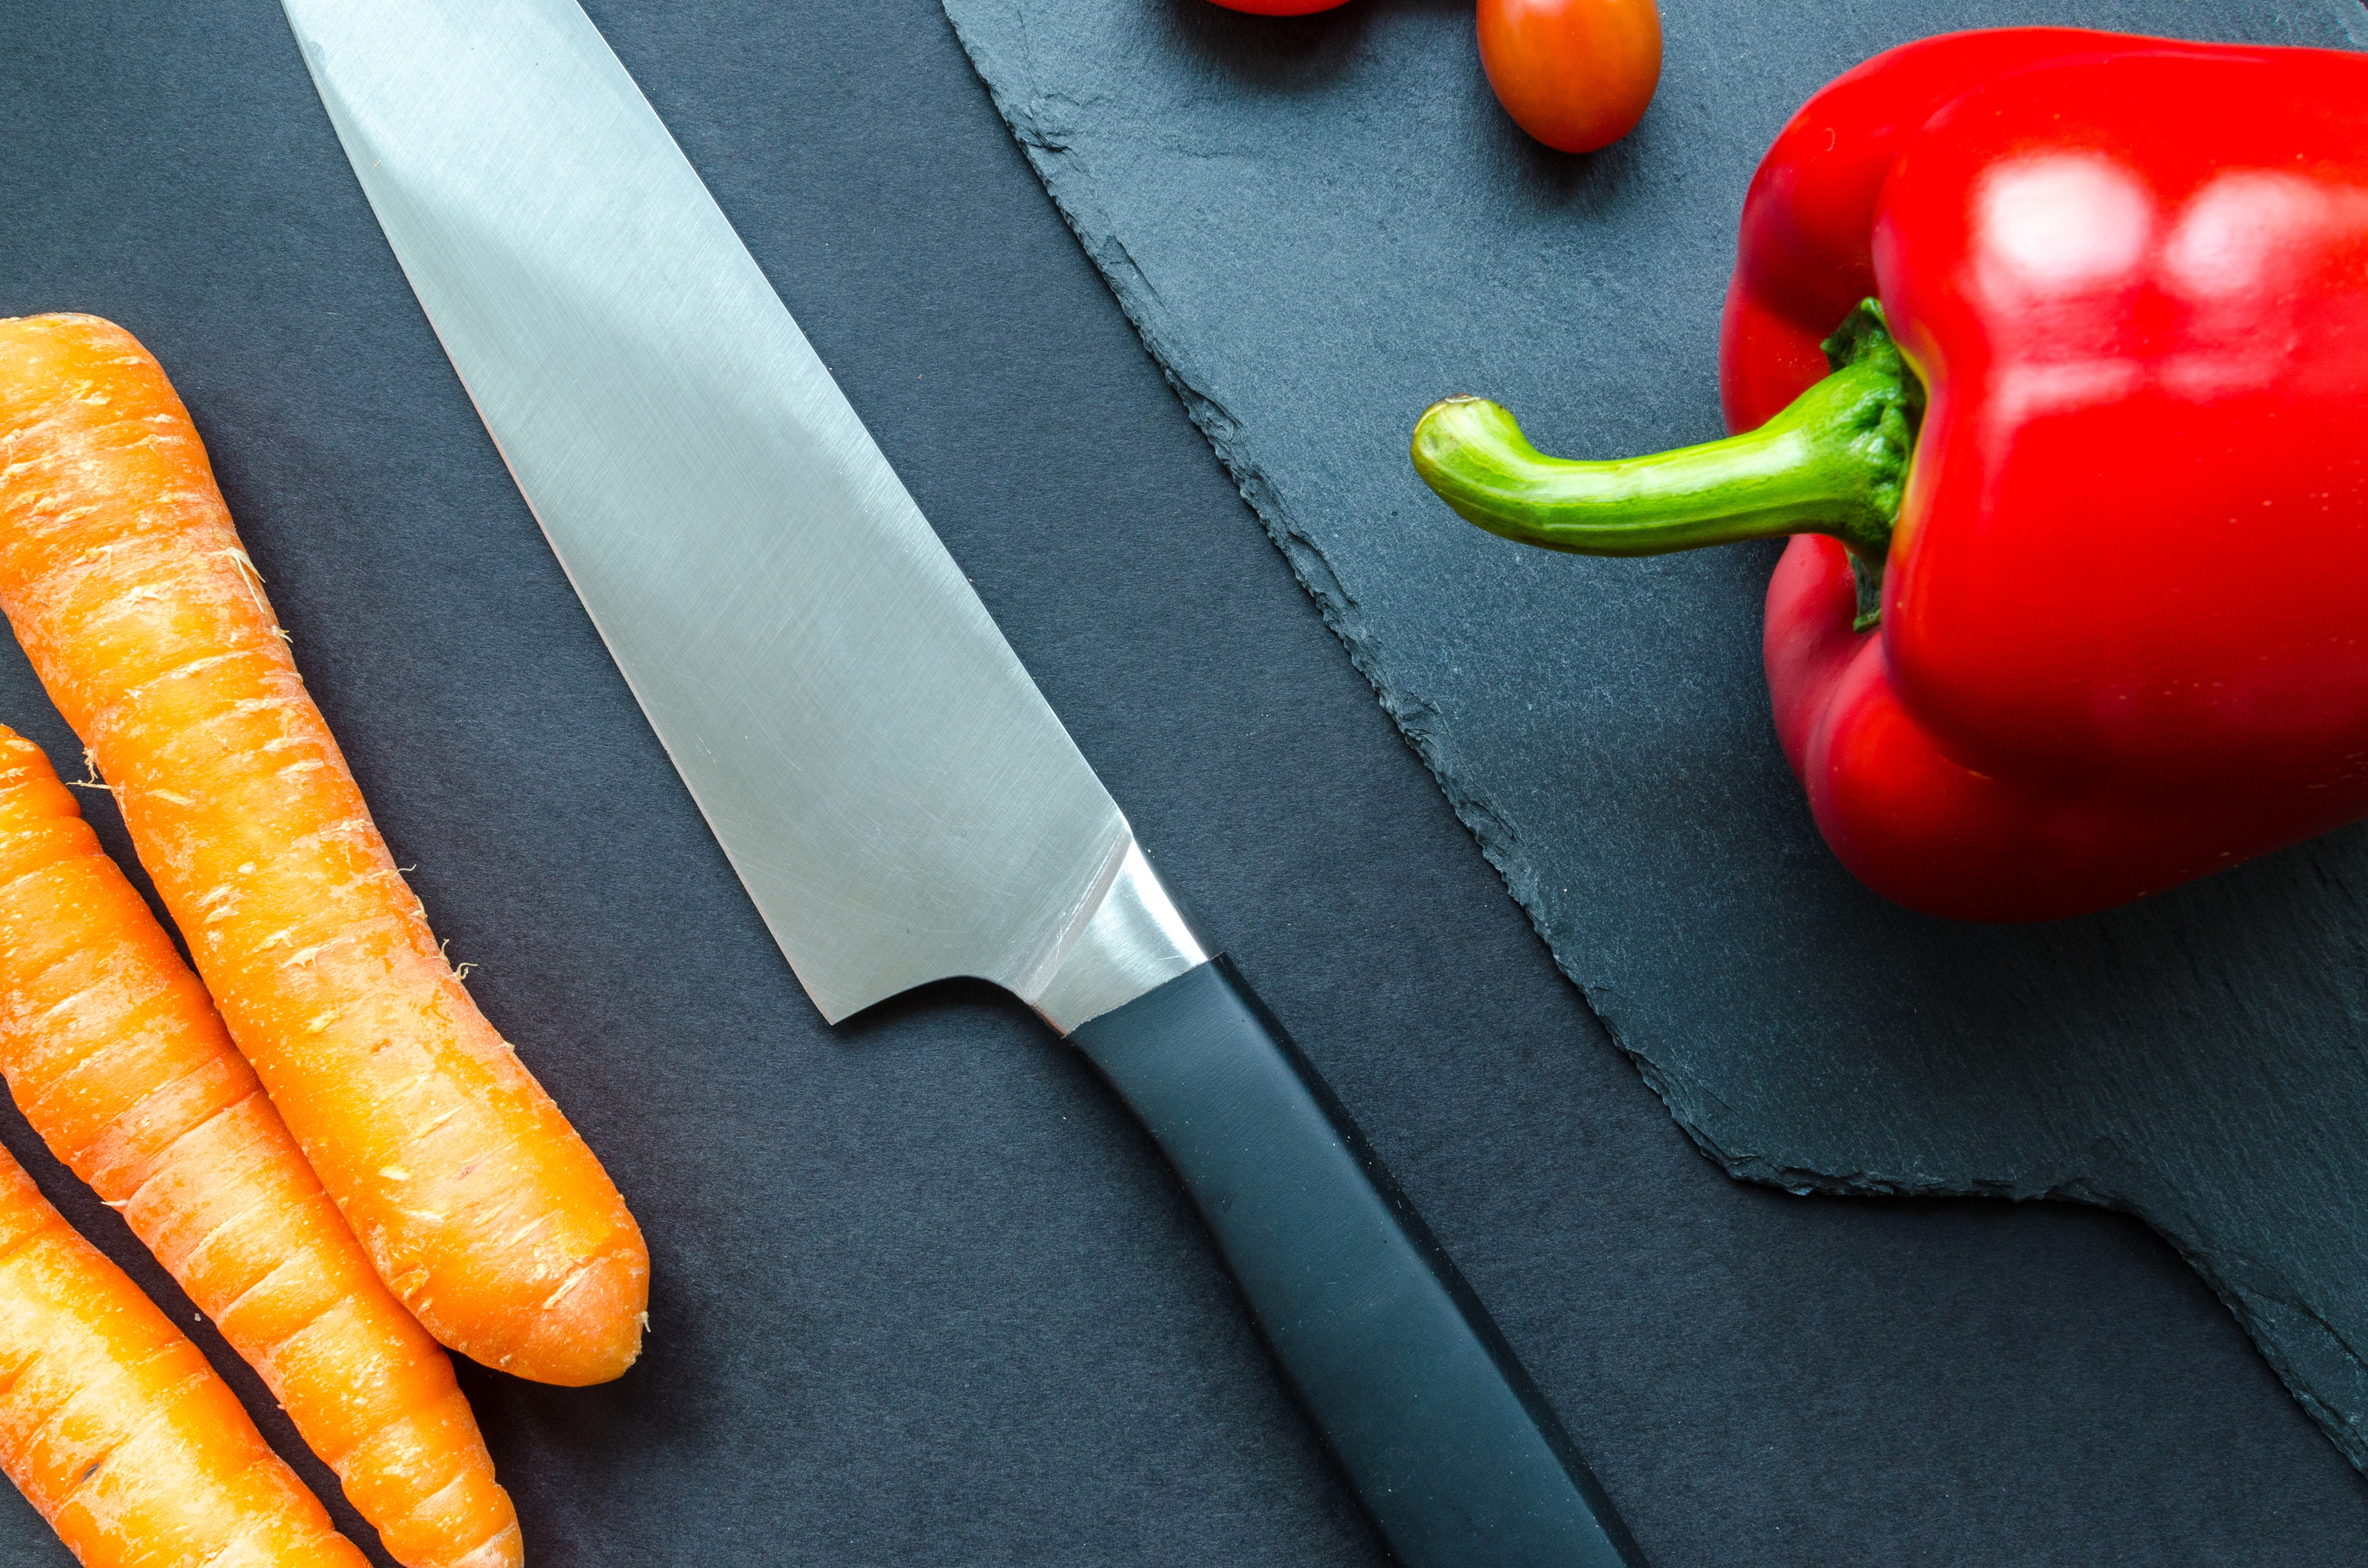 Black Handled Gray Kitchen Knife Beside Orange Carrots and Red Bellpepper, Ingredients, Tomatoes, Table, Red, HQ Photo